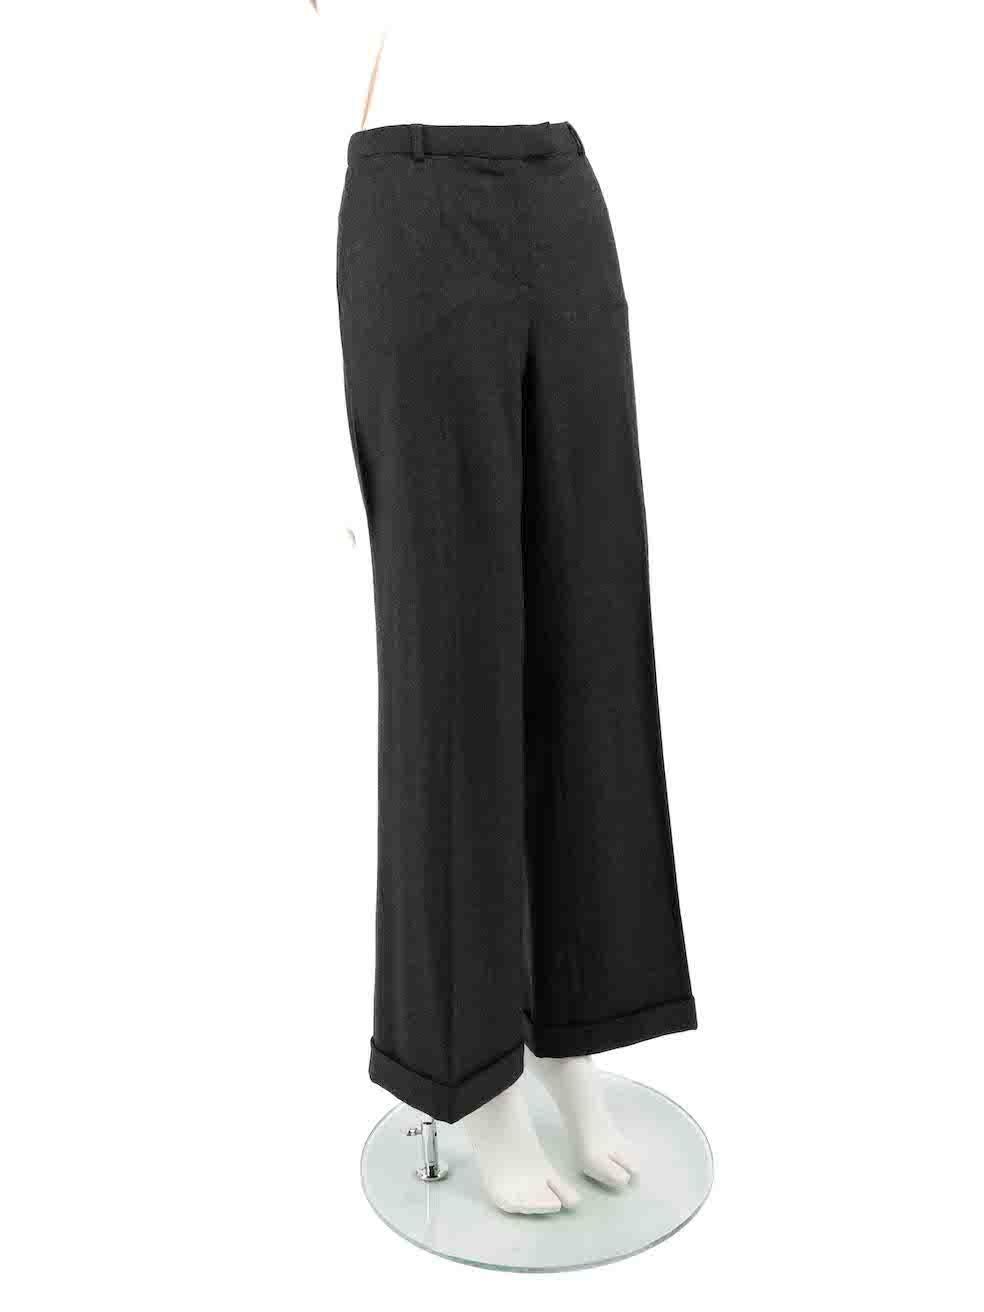 CONDITION is Very good. Hardly any visible wear to trousers is evident on this used Escada designer resale item.
 
 
 
 Details
 
 
 Grey
 
 Wool
 
 Wide leg trousers
 
 Mid rise
 
 Front zip closure with clasp and button
 
 Belt hoops
 
 2x Front